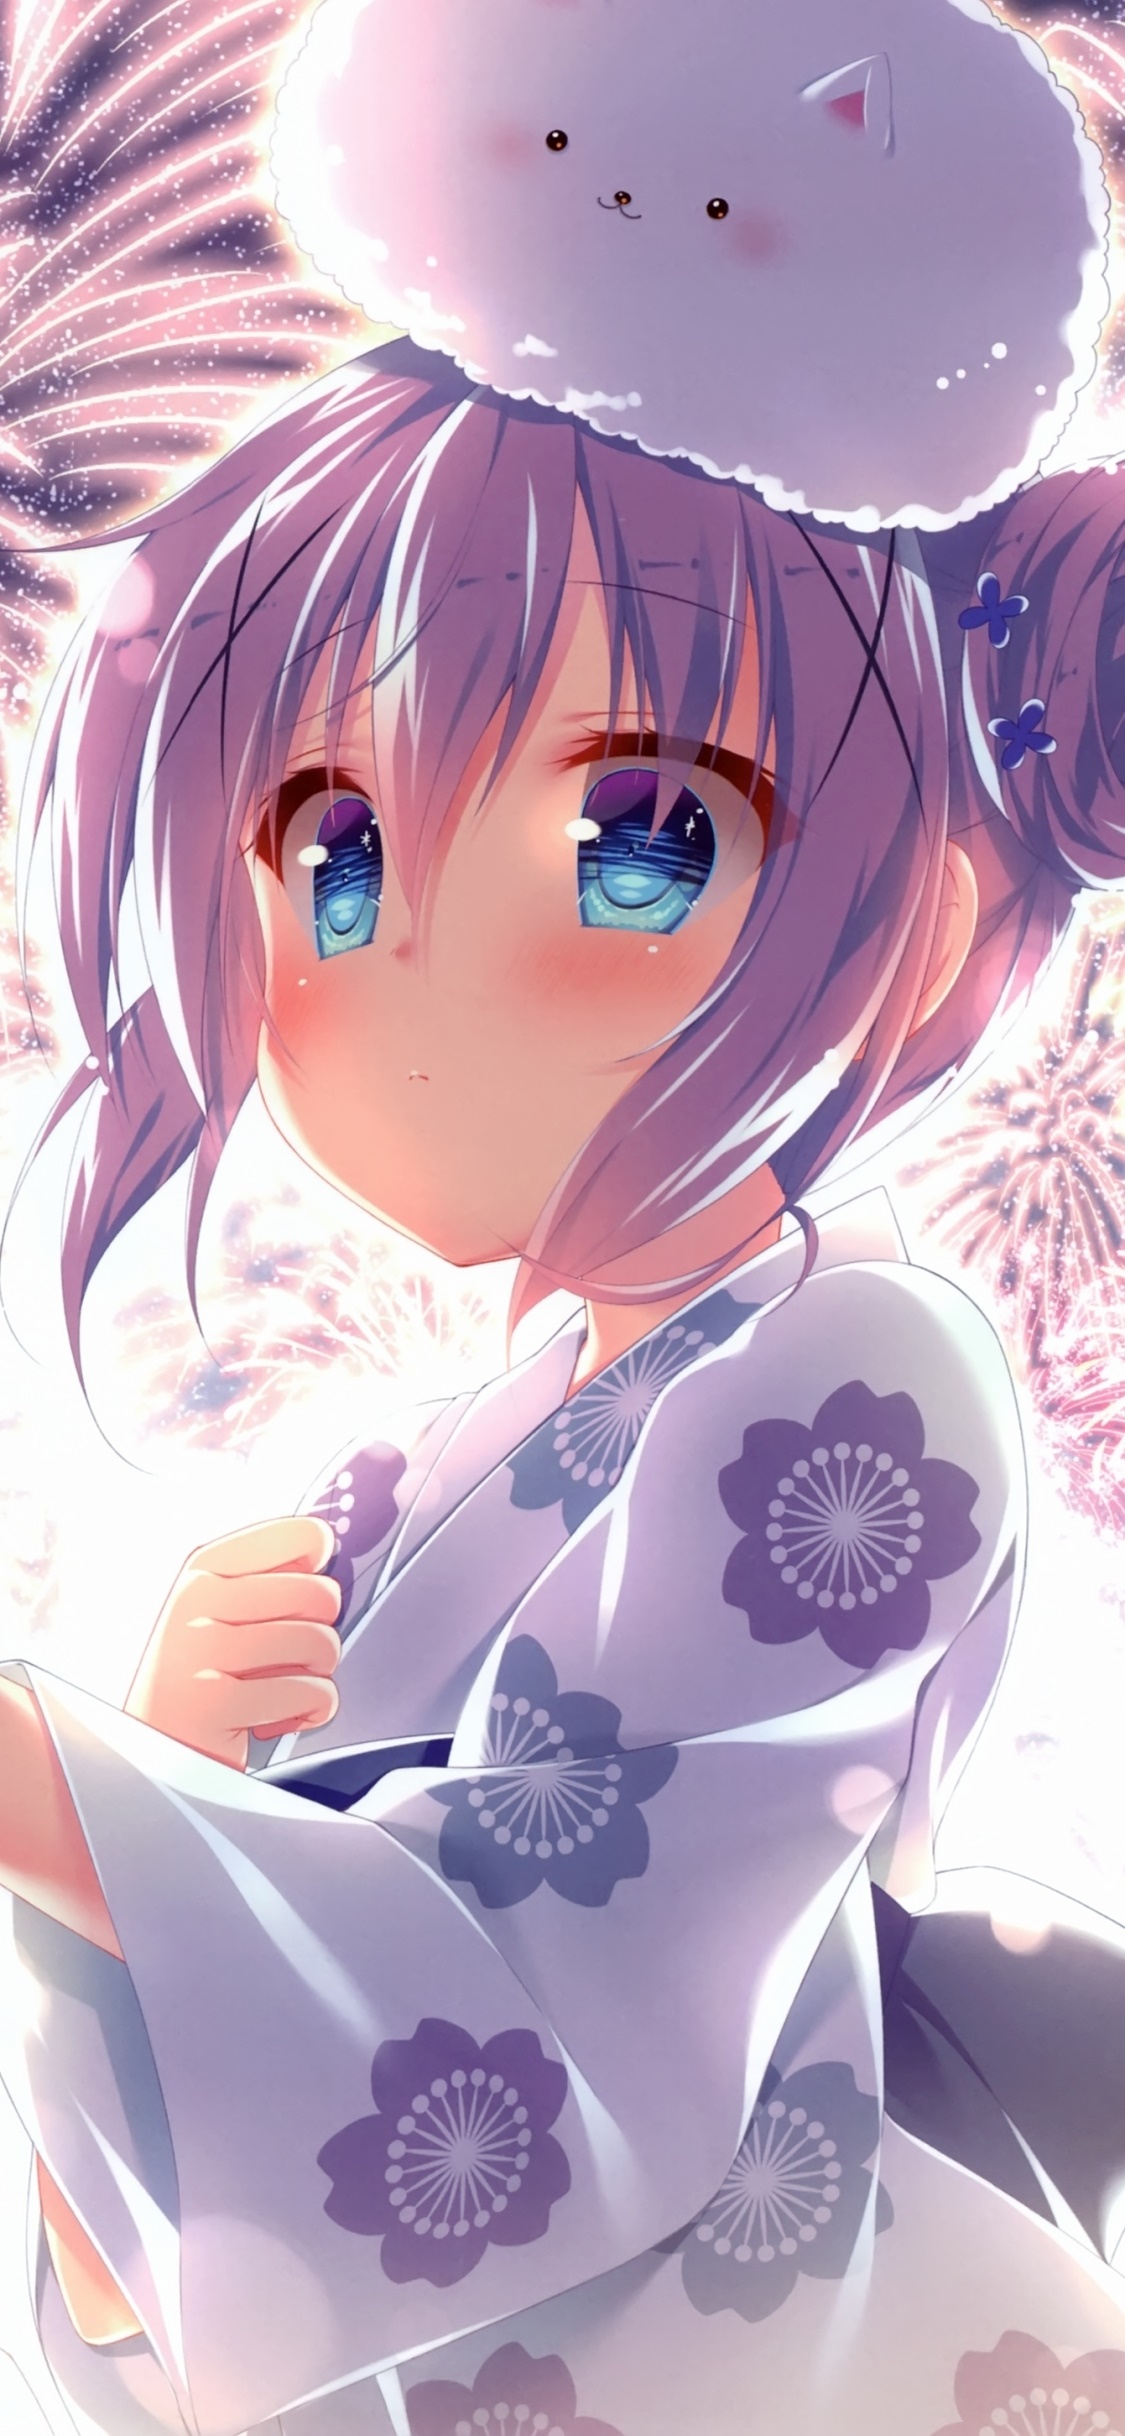 Wallpaper / Anime Is the Order a Rabbit? Phone Wallpaper, Chino Kafū, Cocoa Hoto, 1125x2436 free download